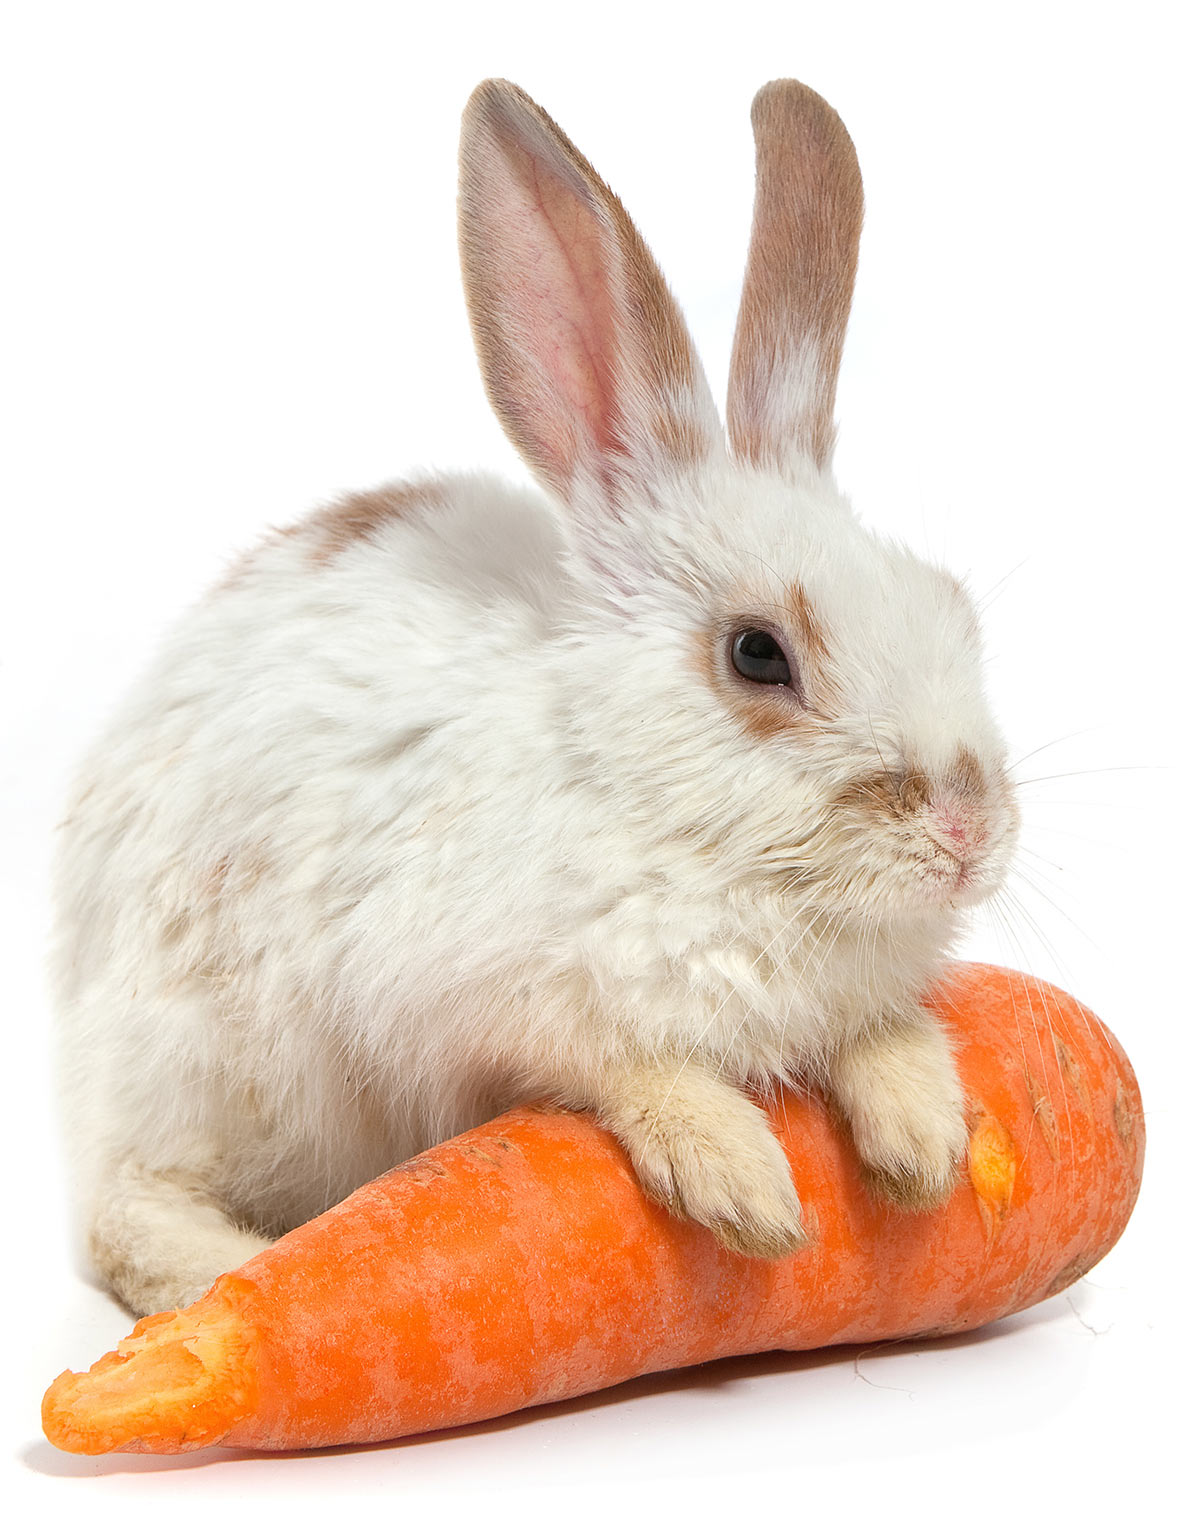 Can Rabbits Eat Carrots Daily Or Just As A Special Treat?